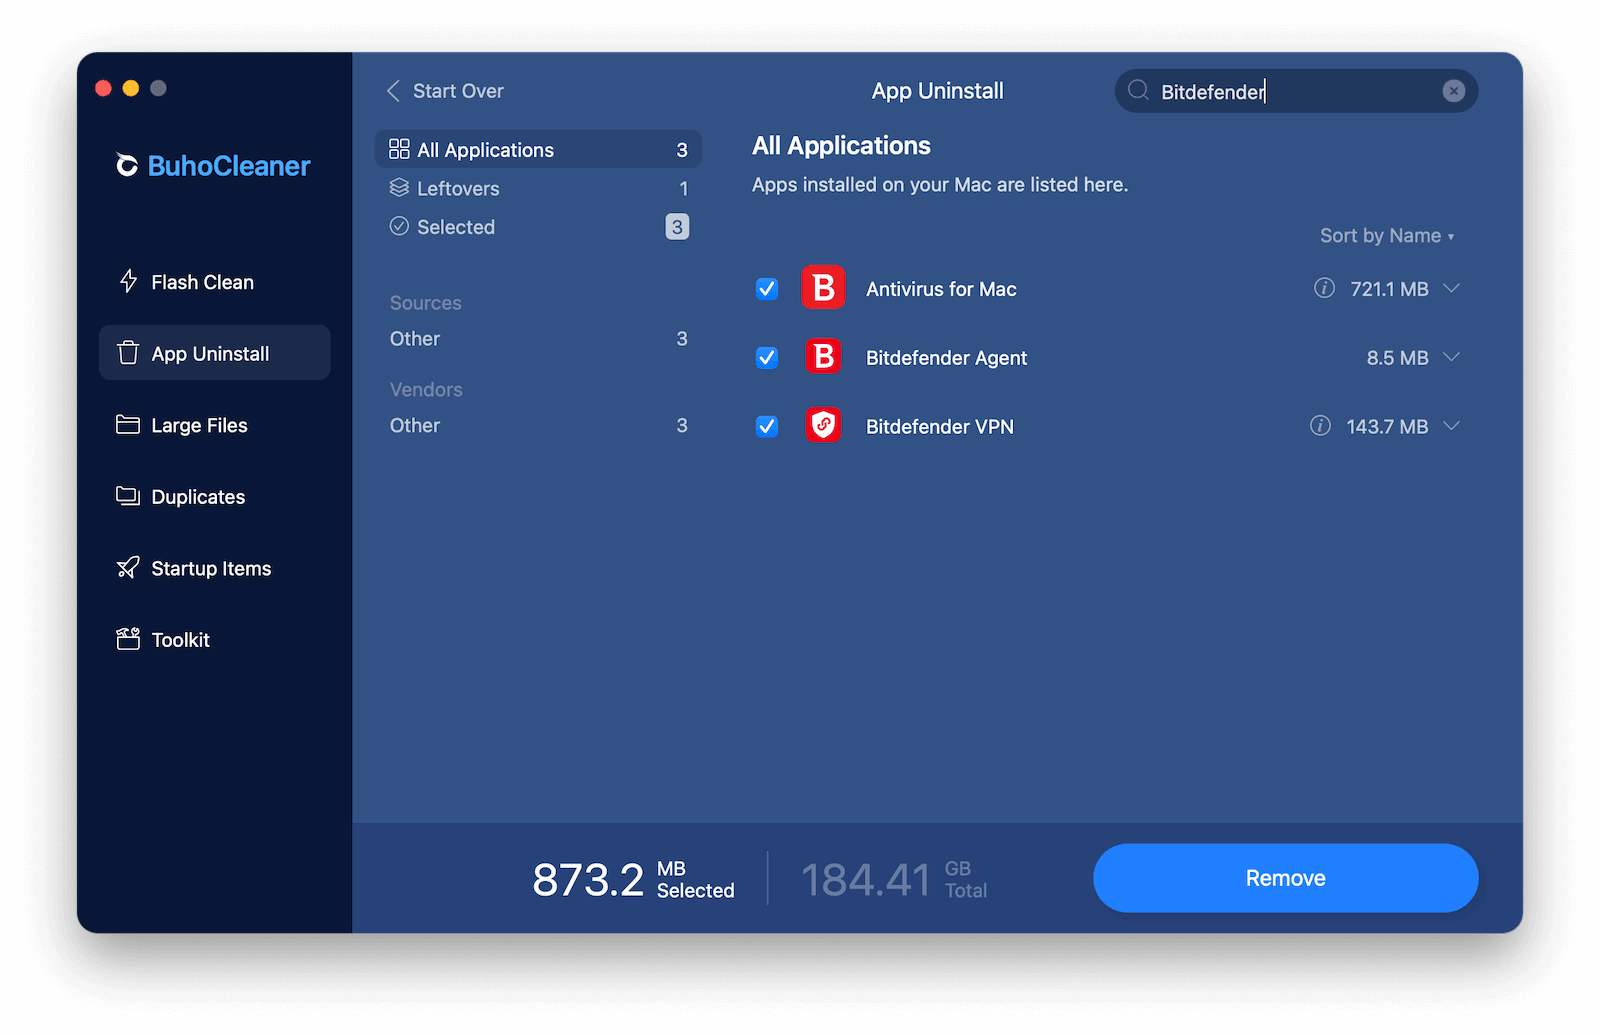 Quickly Uninstall Bitdefender on Mac with BuhoCleaner